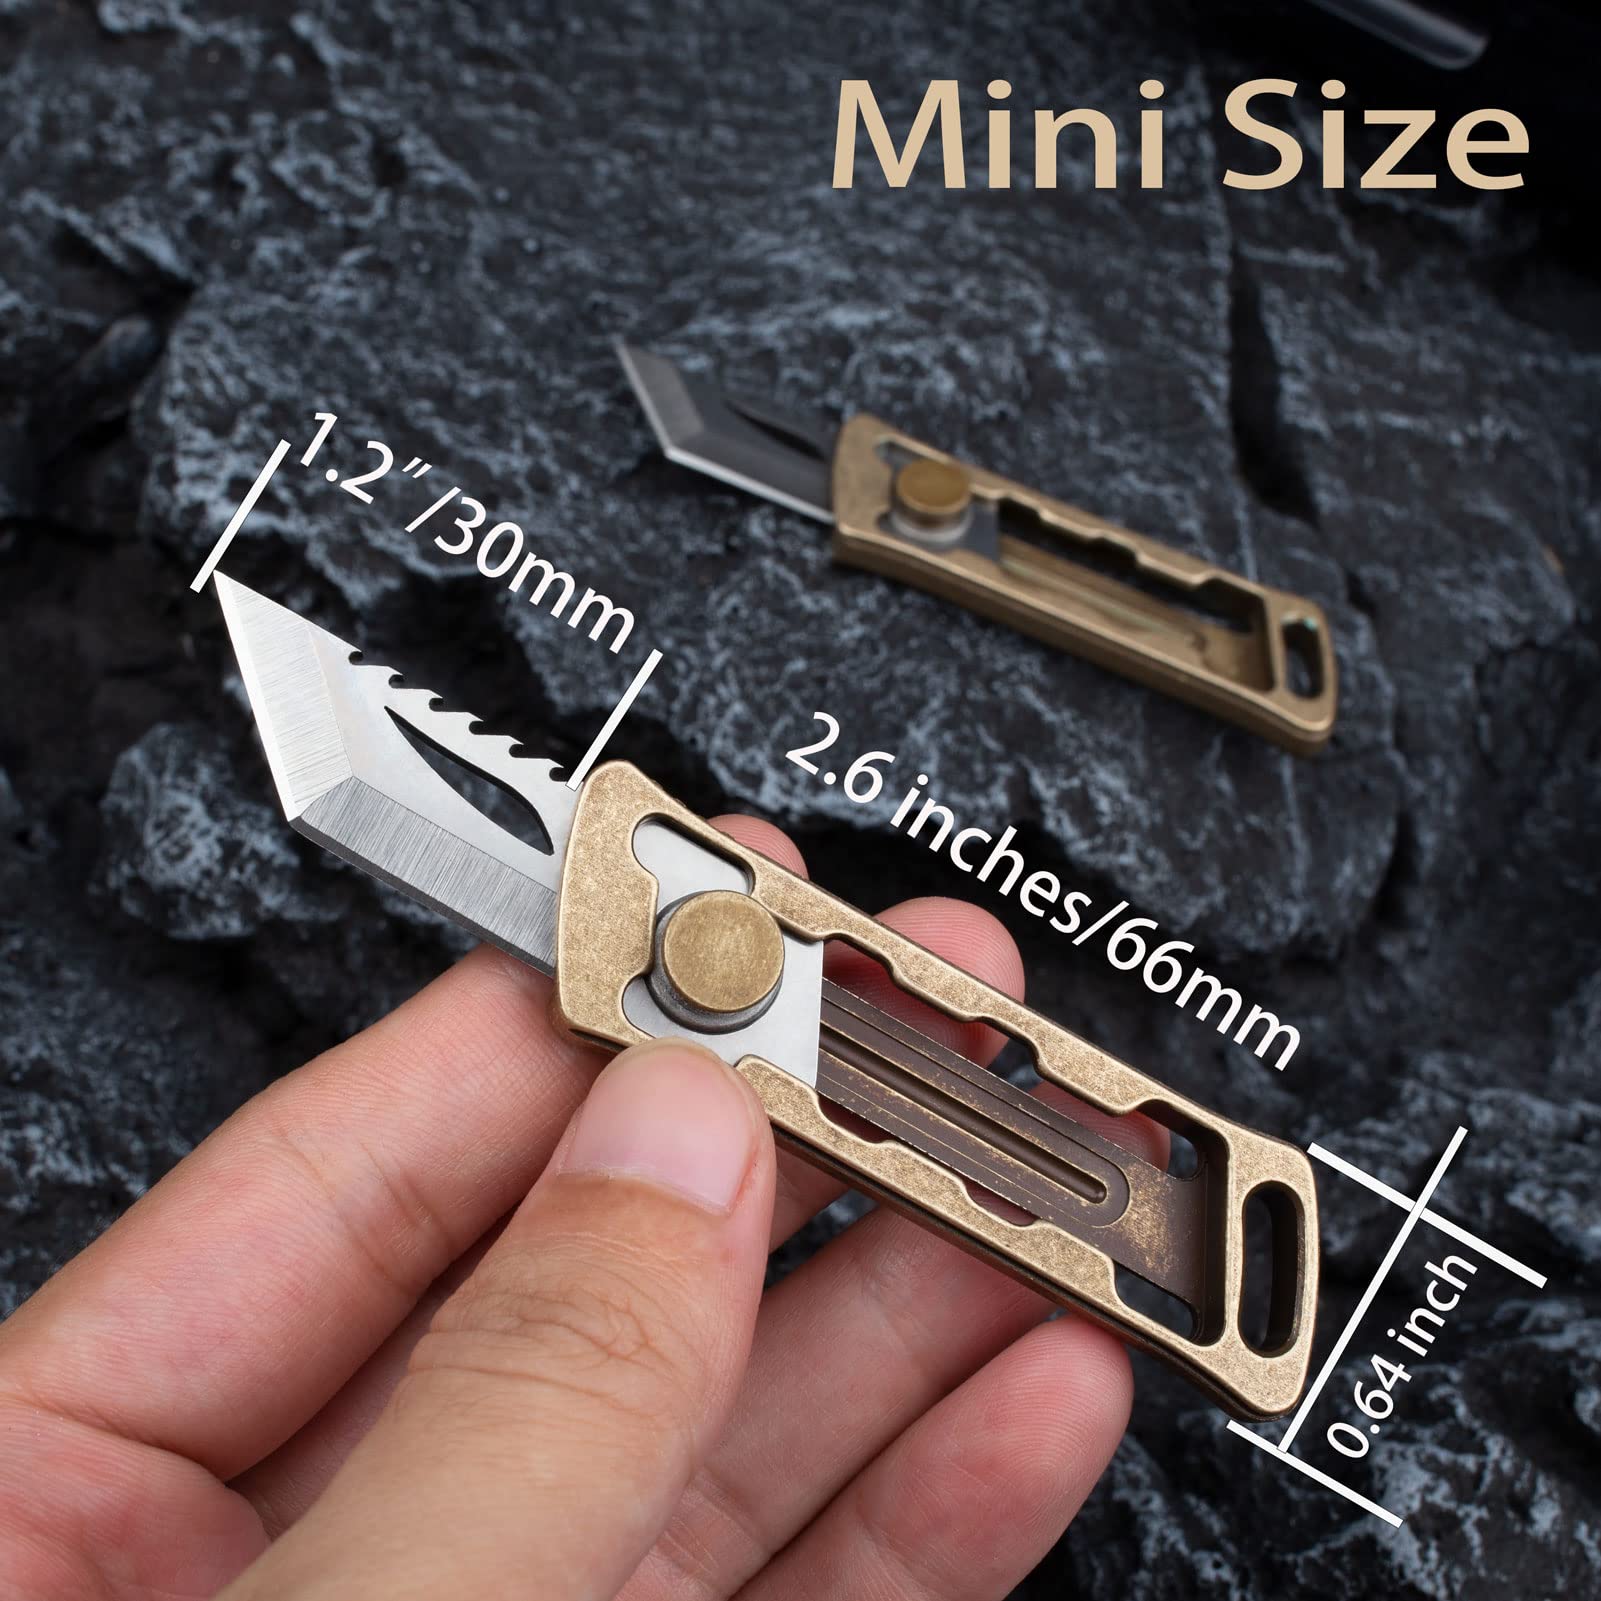 TENCHILON TK26 Mini Retractable Utility Box Cutter Keychain Knife, 1.2 inches D2 Tanto Blades, 2.6 inches Tumbled Skeletonized Brass Handles, Small Pocket EDC Cutting Tool Knives